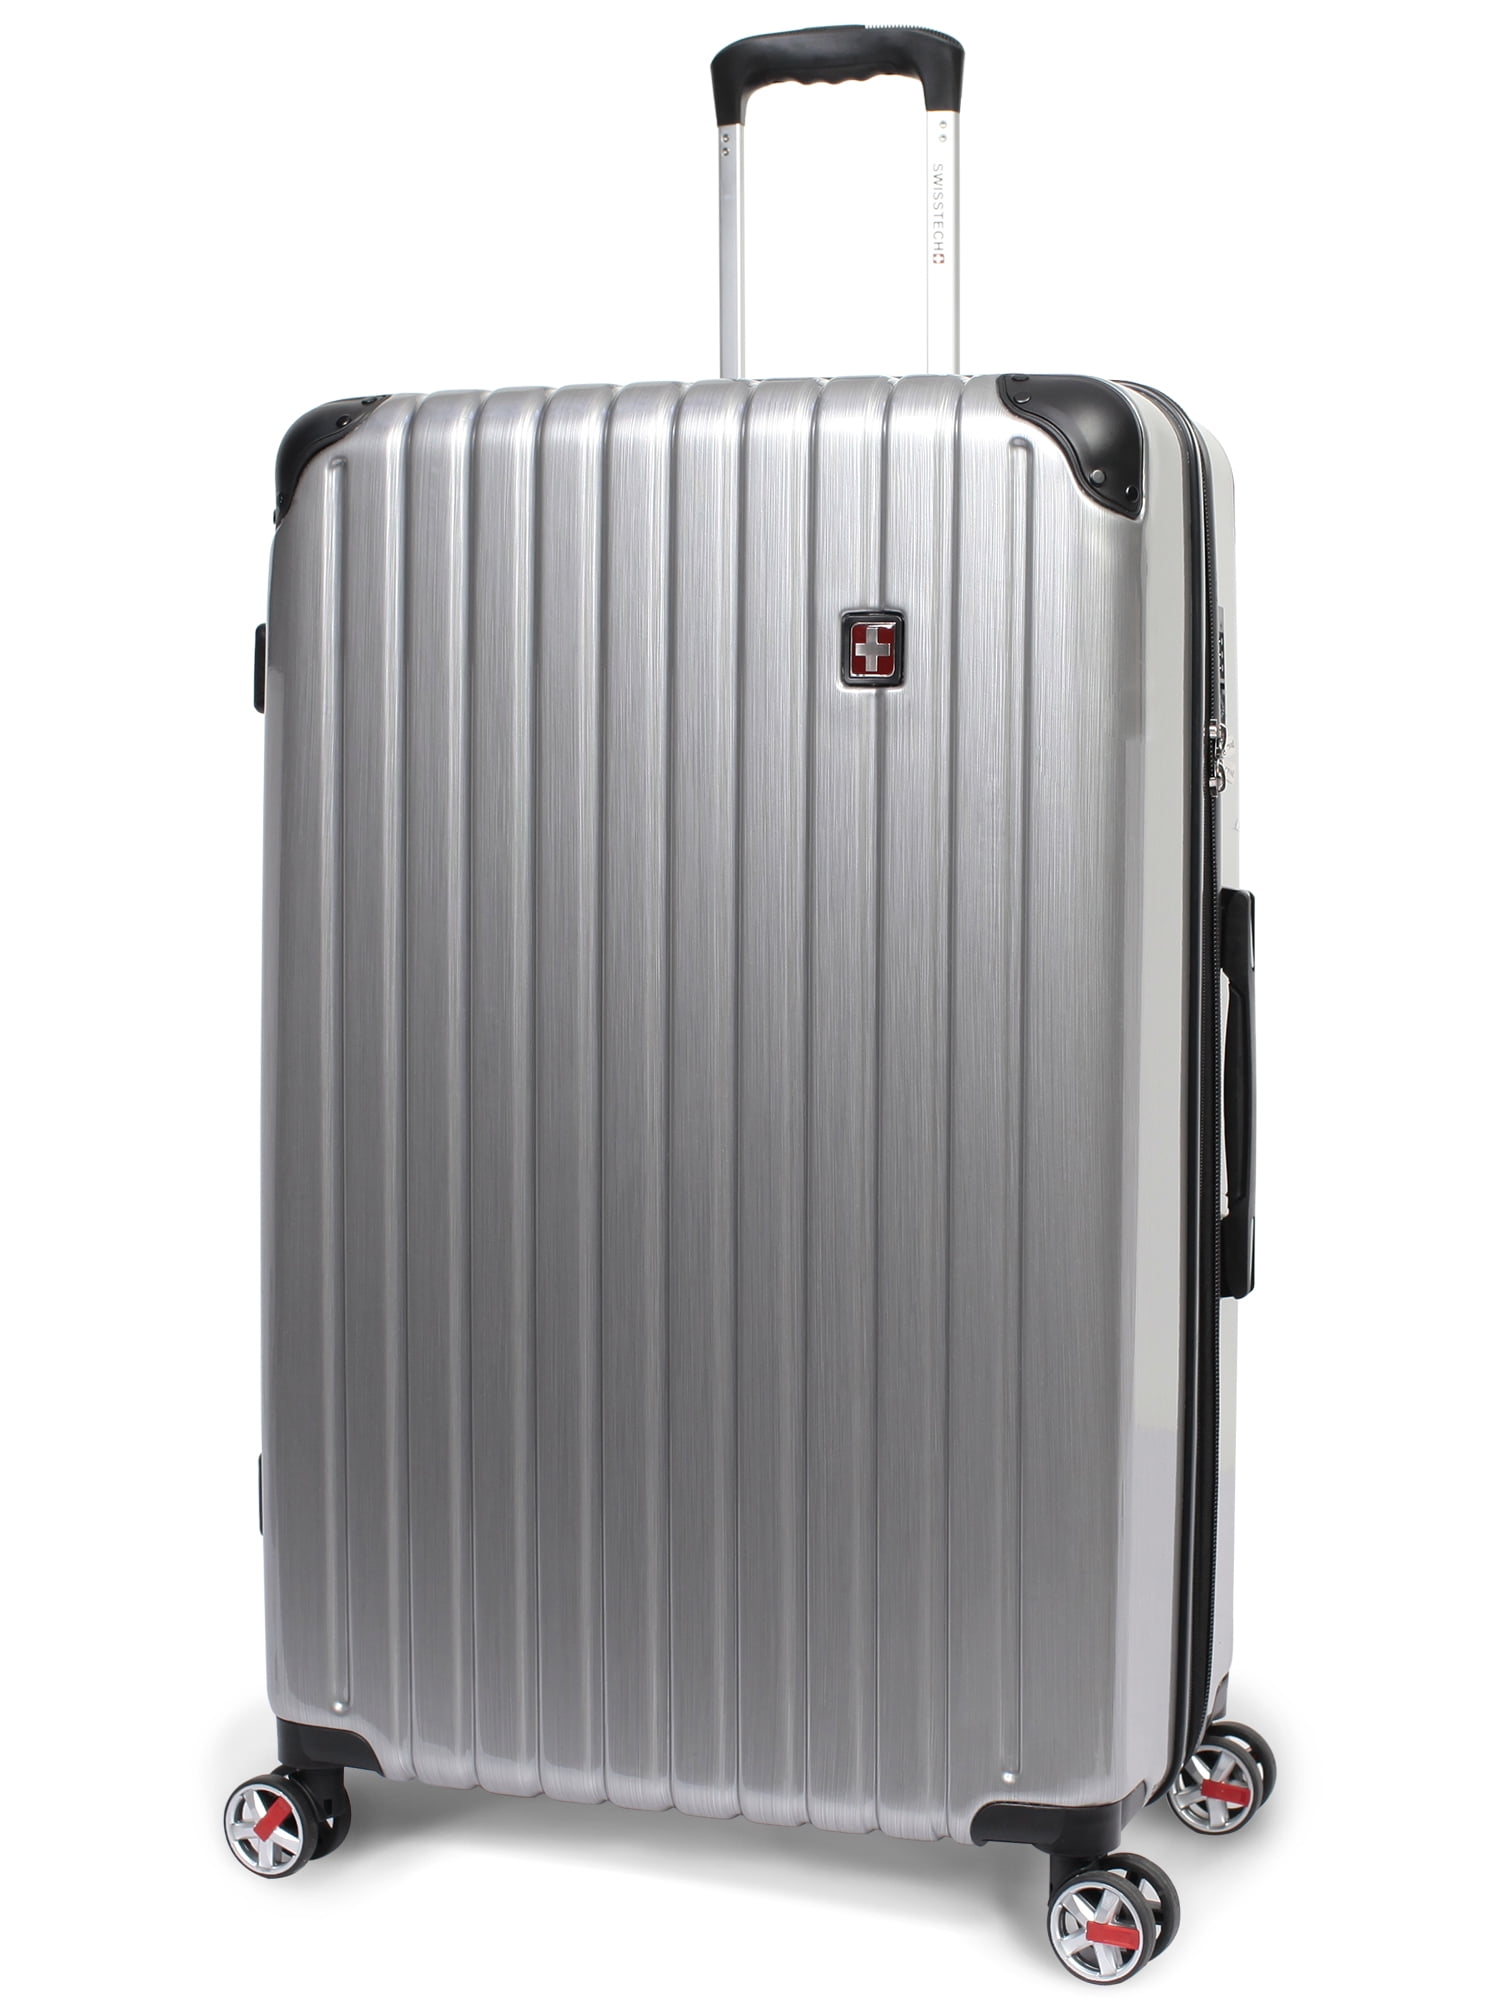 SwissTech Exhibition Polycarbonate Hard Side Check Luggage: 30" $85 or 22" $60 + Free Shipping